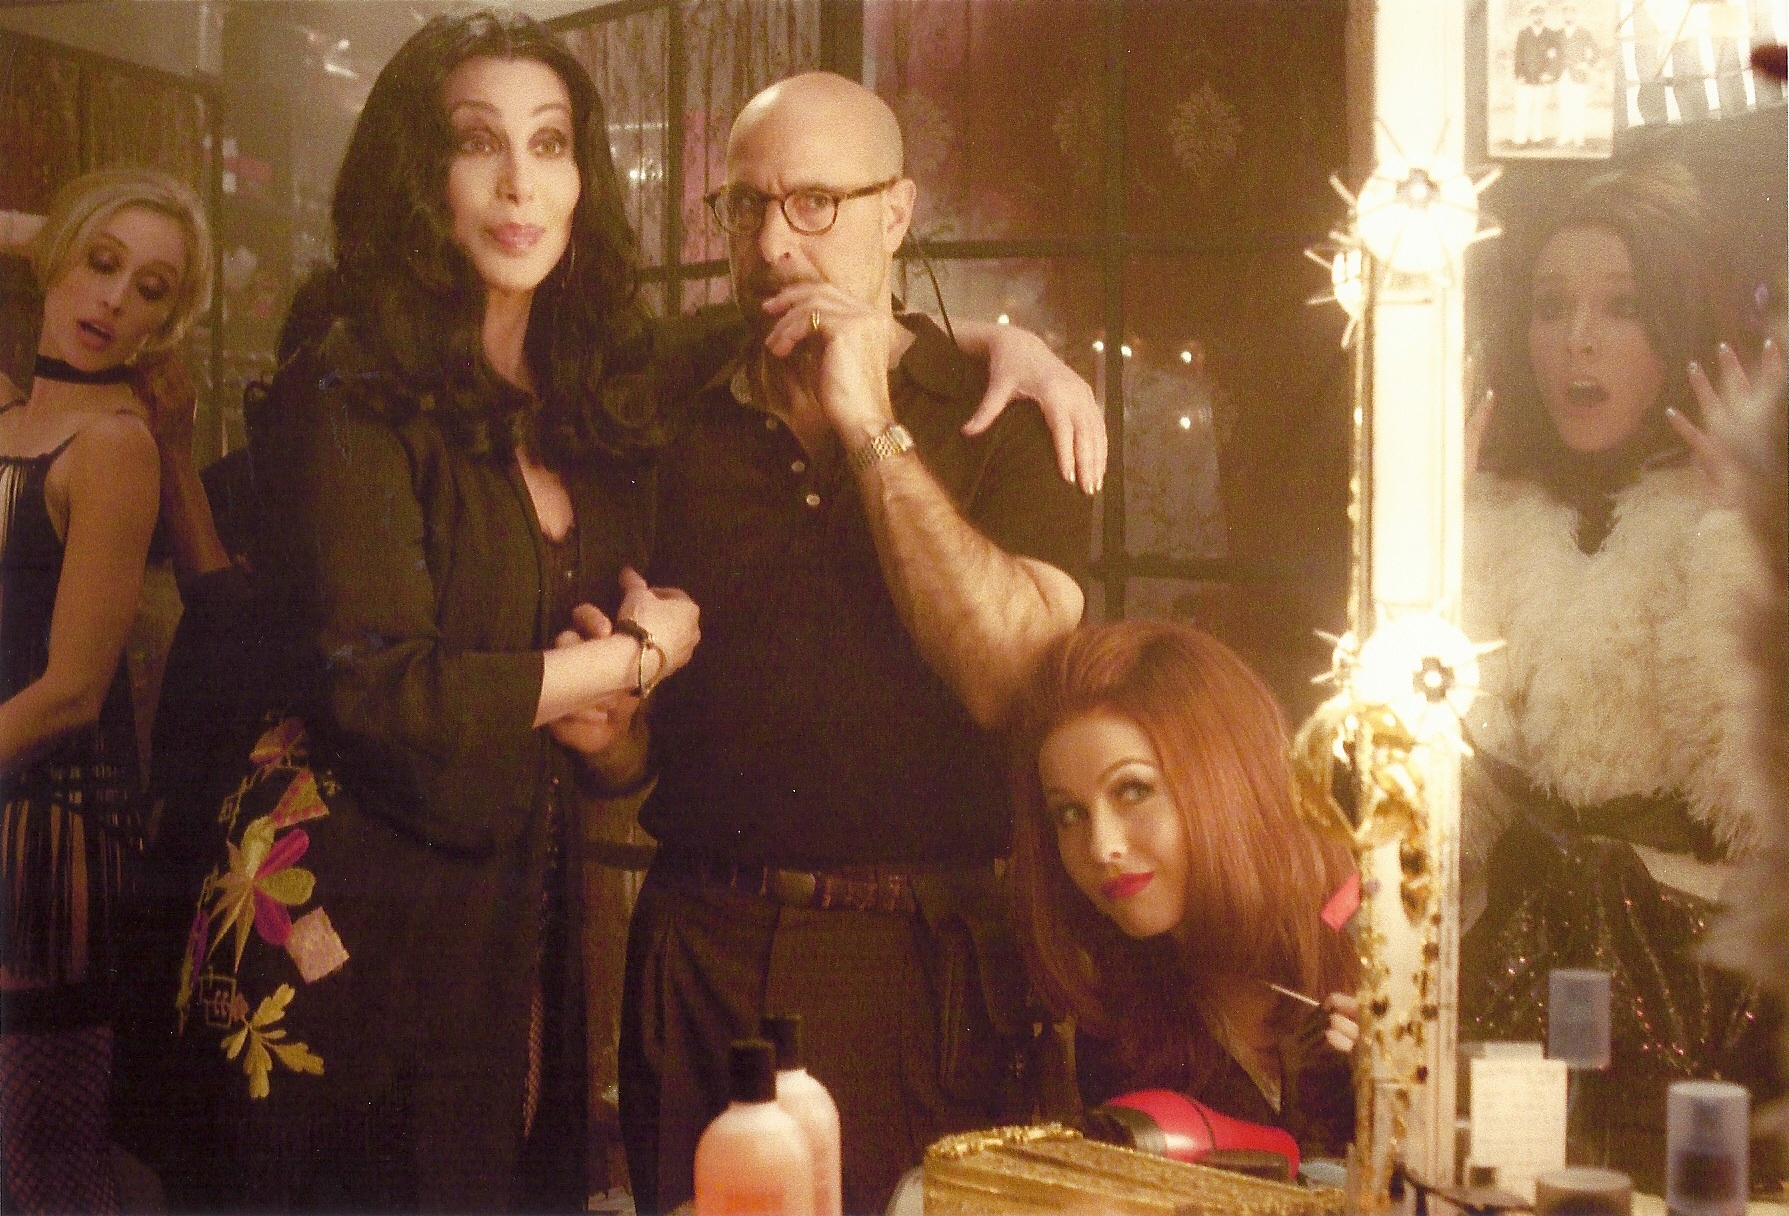 Burlesque (2010) with Cher, Stanley Tucci, Julianne Hough and Kristen Bell